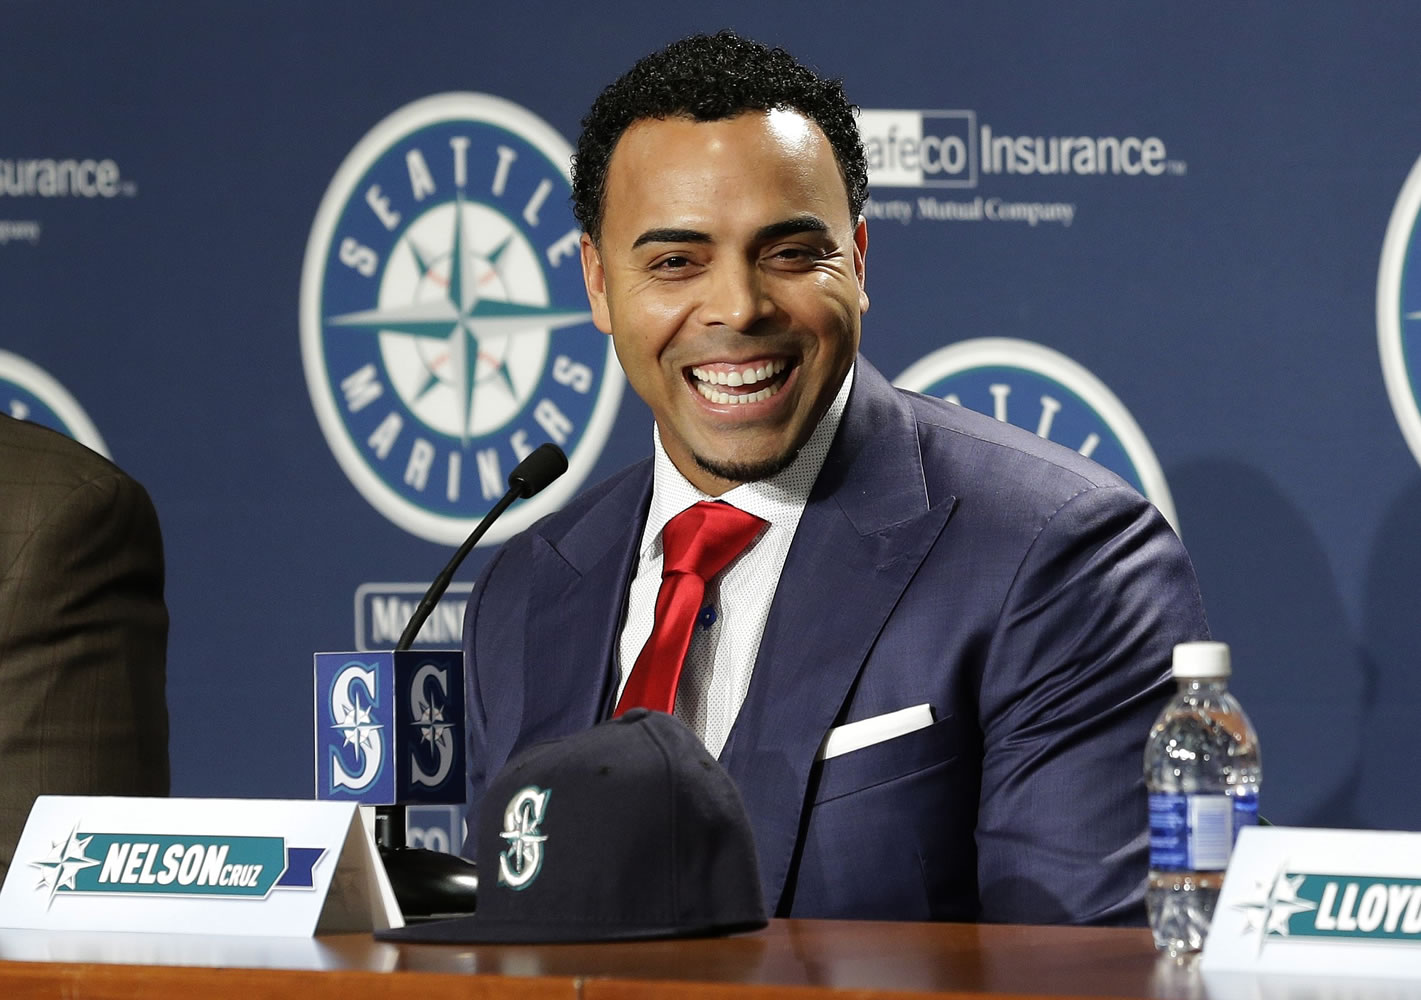 Seattle Mariners' Nelson Cruz smiles as he talks to reporters after being introduced at a baseball news conference, Thursday, Dec.